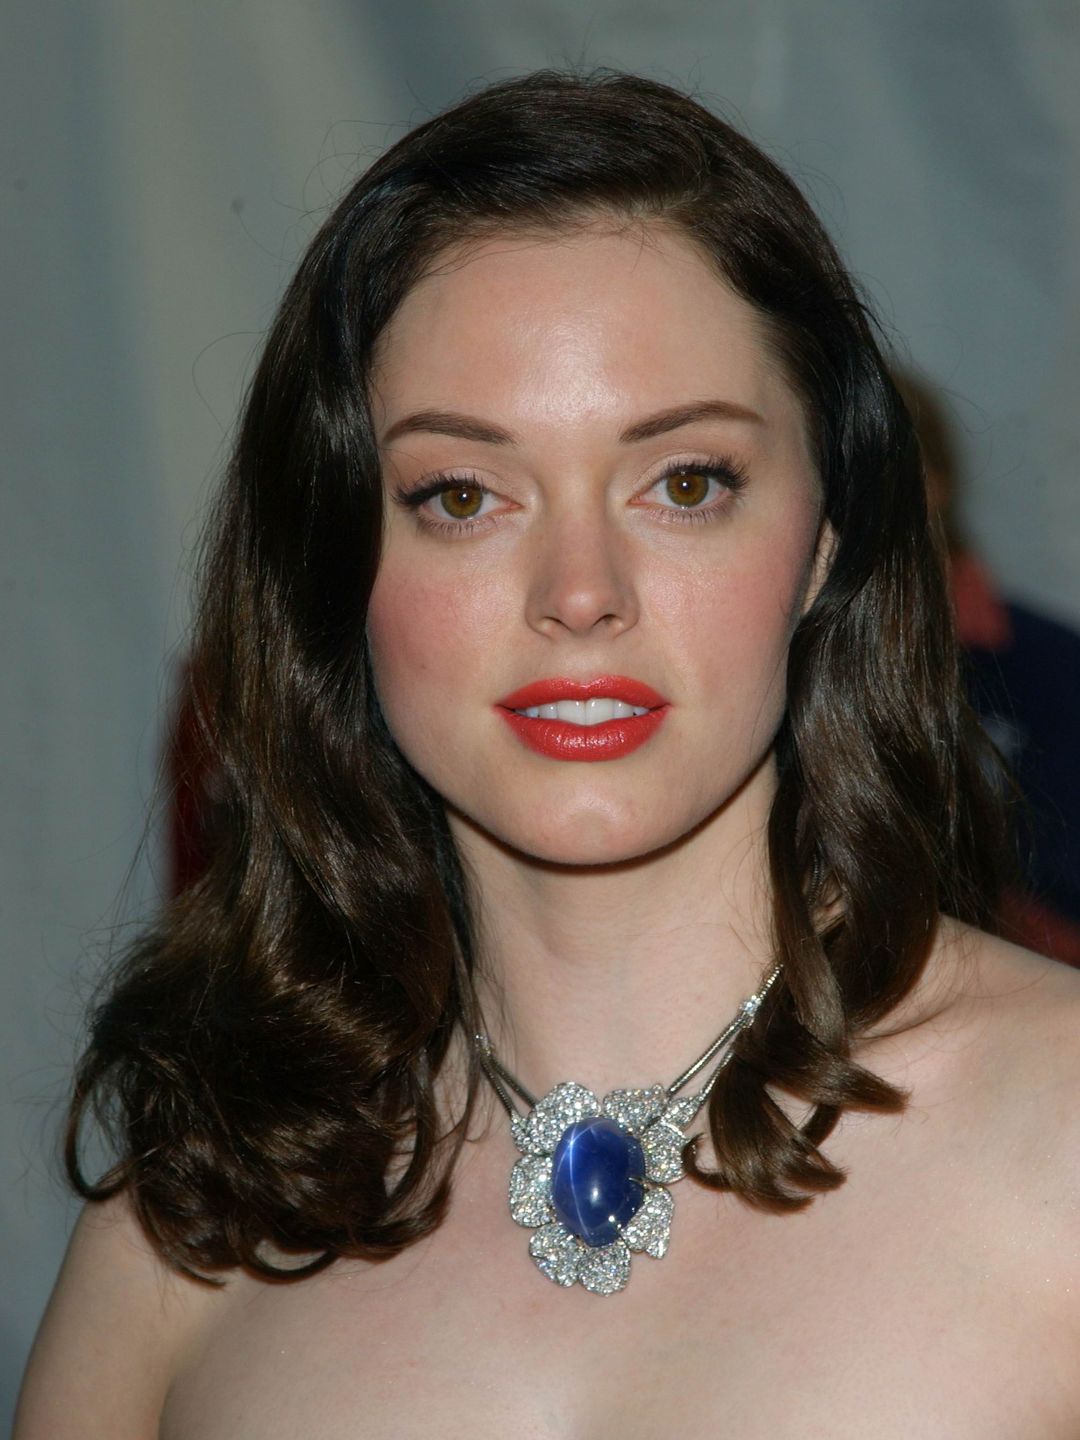 Rose McGowan in real life